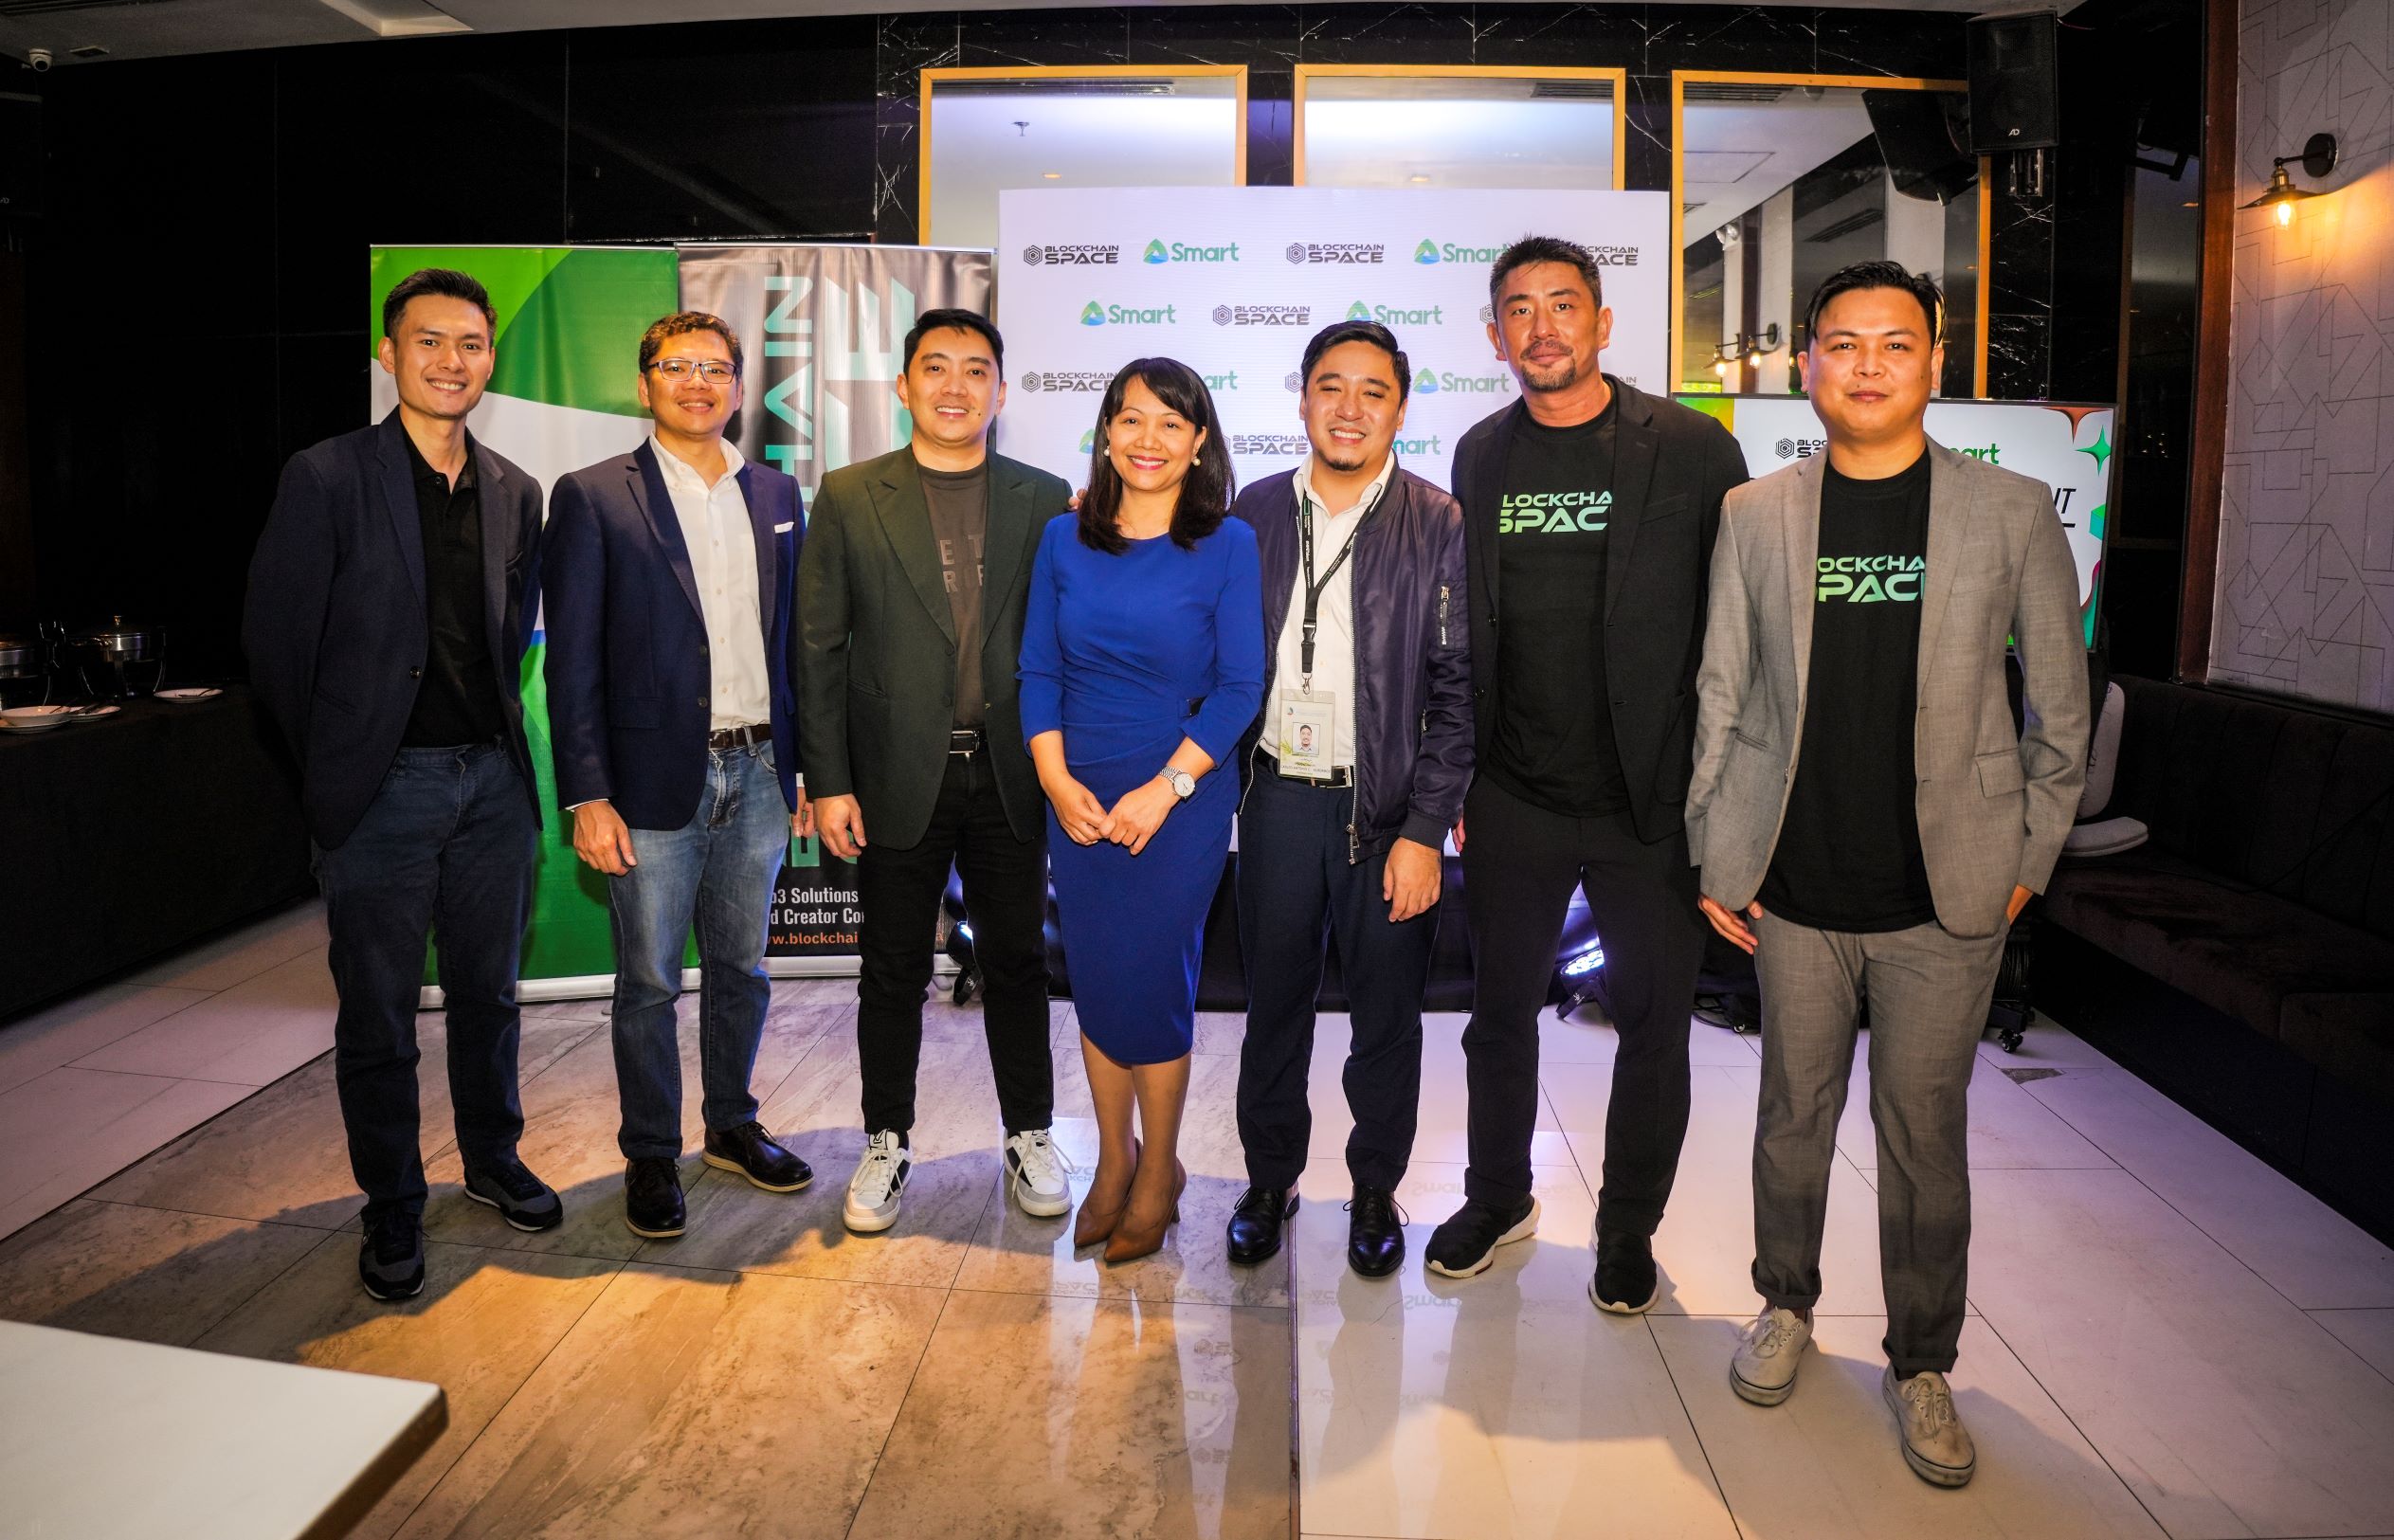 Department of Information and Communications Technology (DICT) Director Emmy Lou Delfin (middle) and Project Development Officer III Carlos Albornoz (fifth from left) join the executives of BlockchainSpace and Smart during the press conference announcing the partnership.